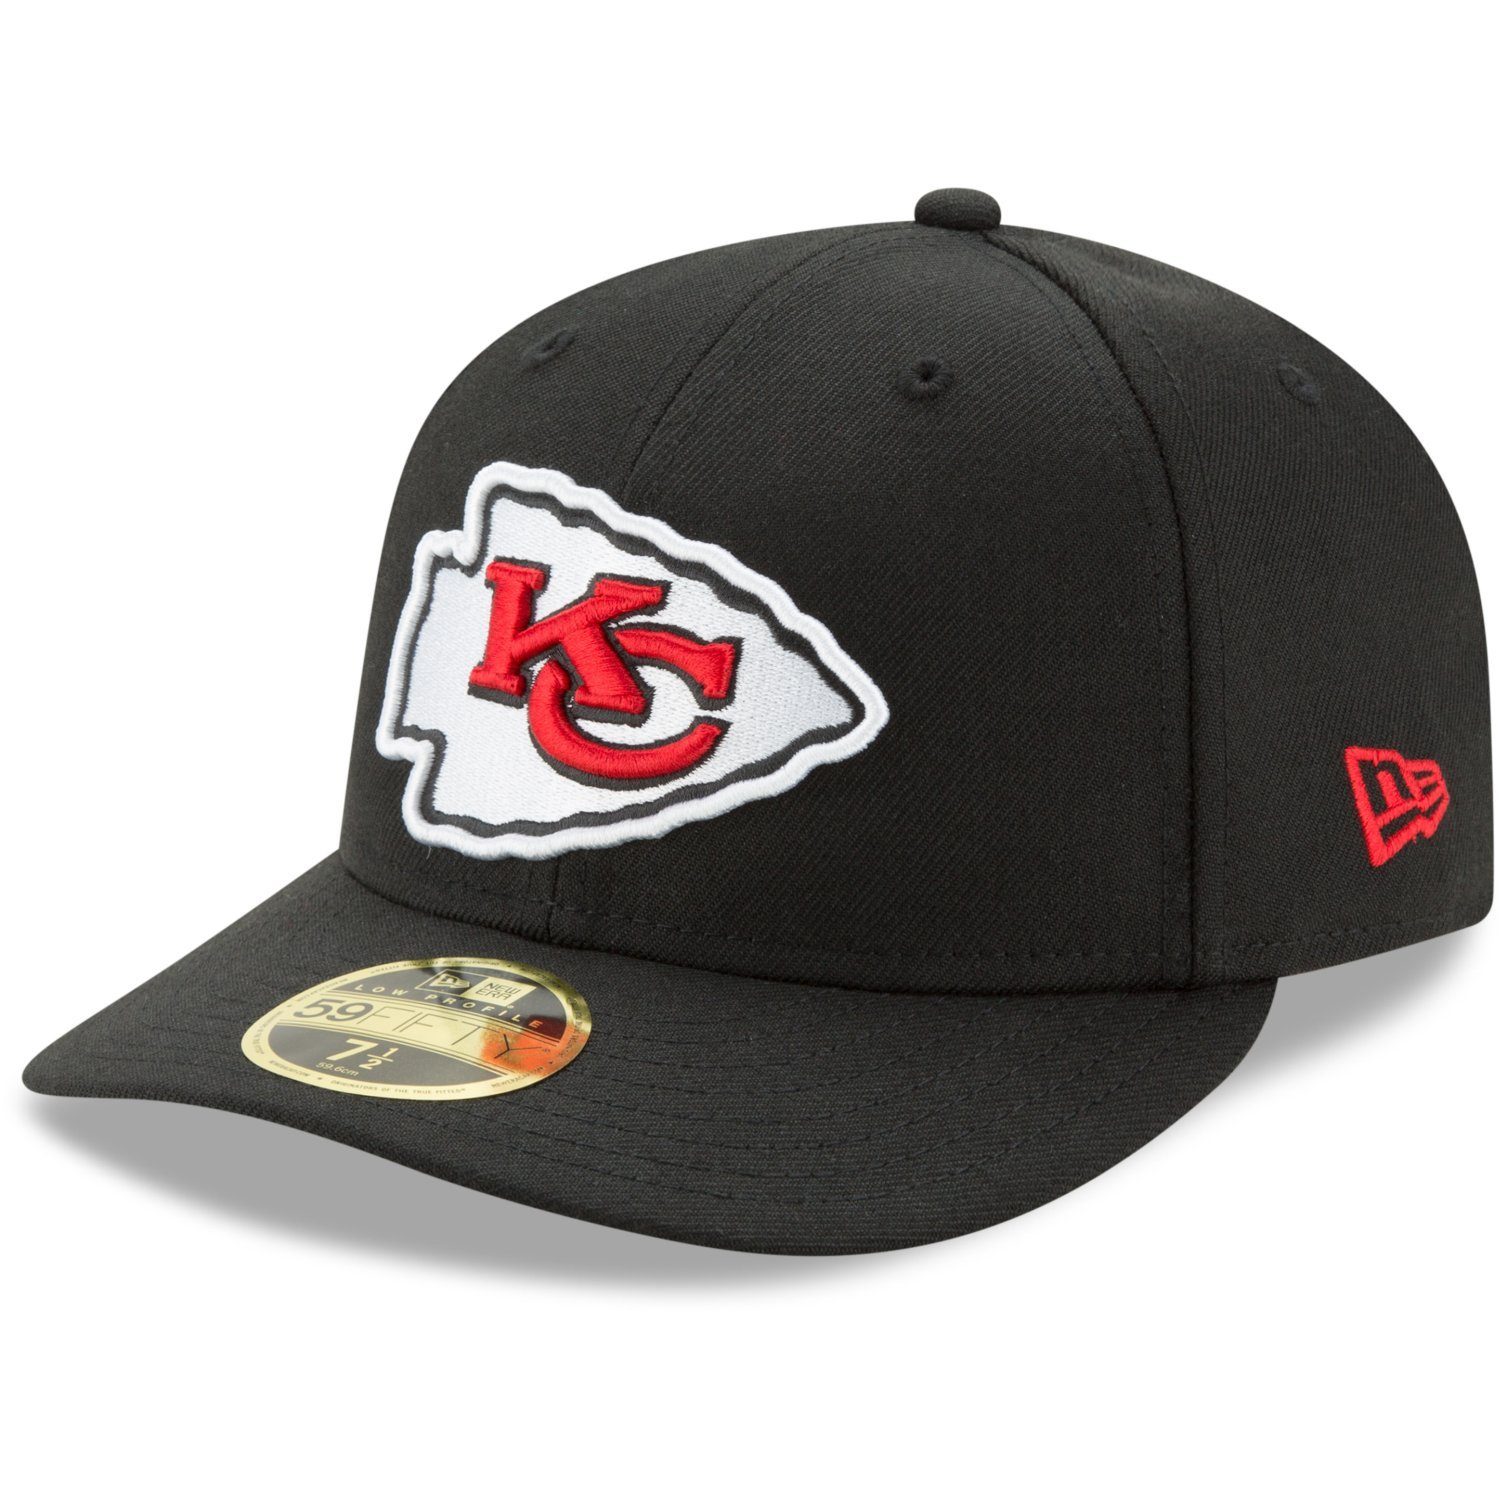 New Era Fitted Cap 59Fifty LOW PROFILE Kansas City Chiefs